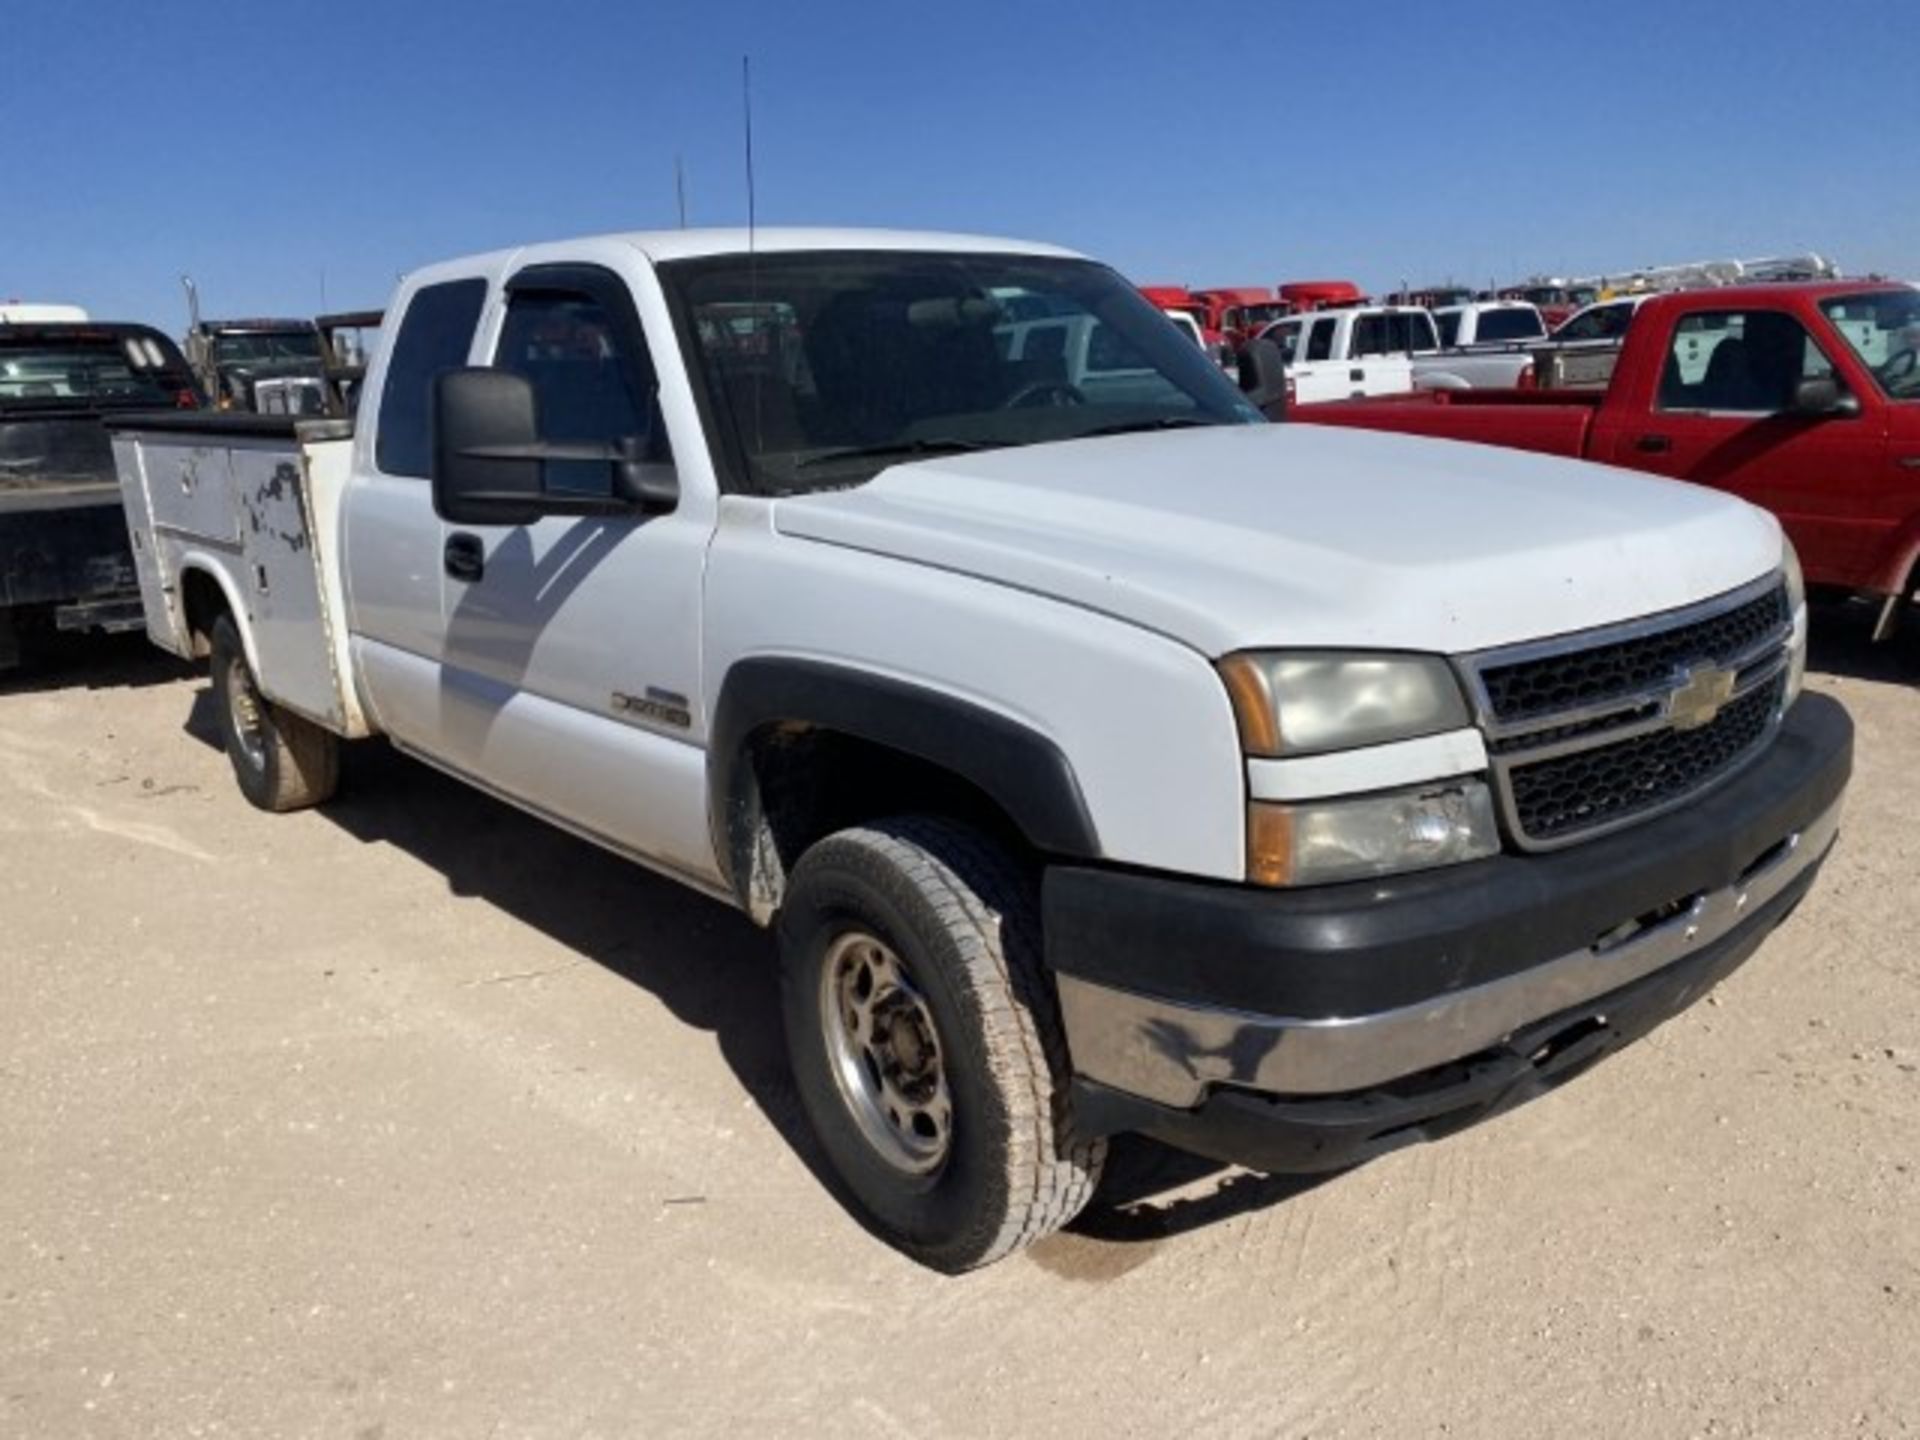 2006 Chevrolet 2500HD Service Truck VIN: 1GBHK29D06E197105 Odometer States: - Image 2 of 6